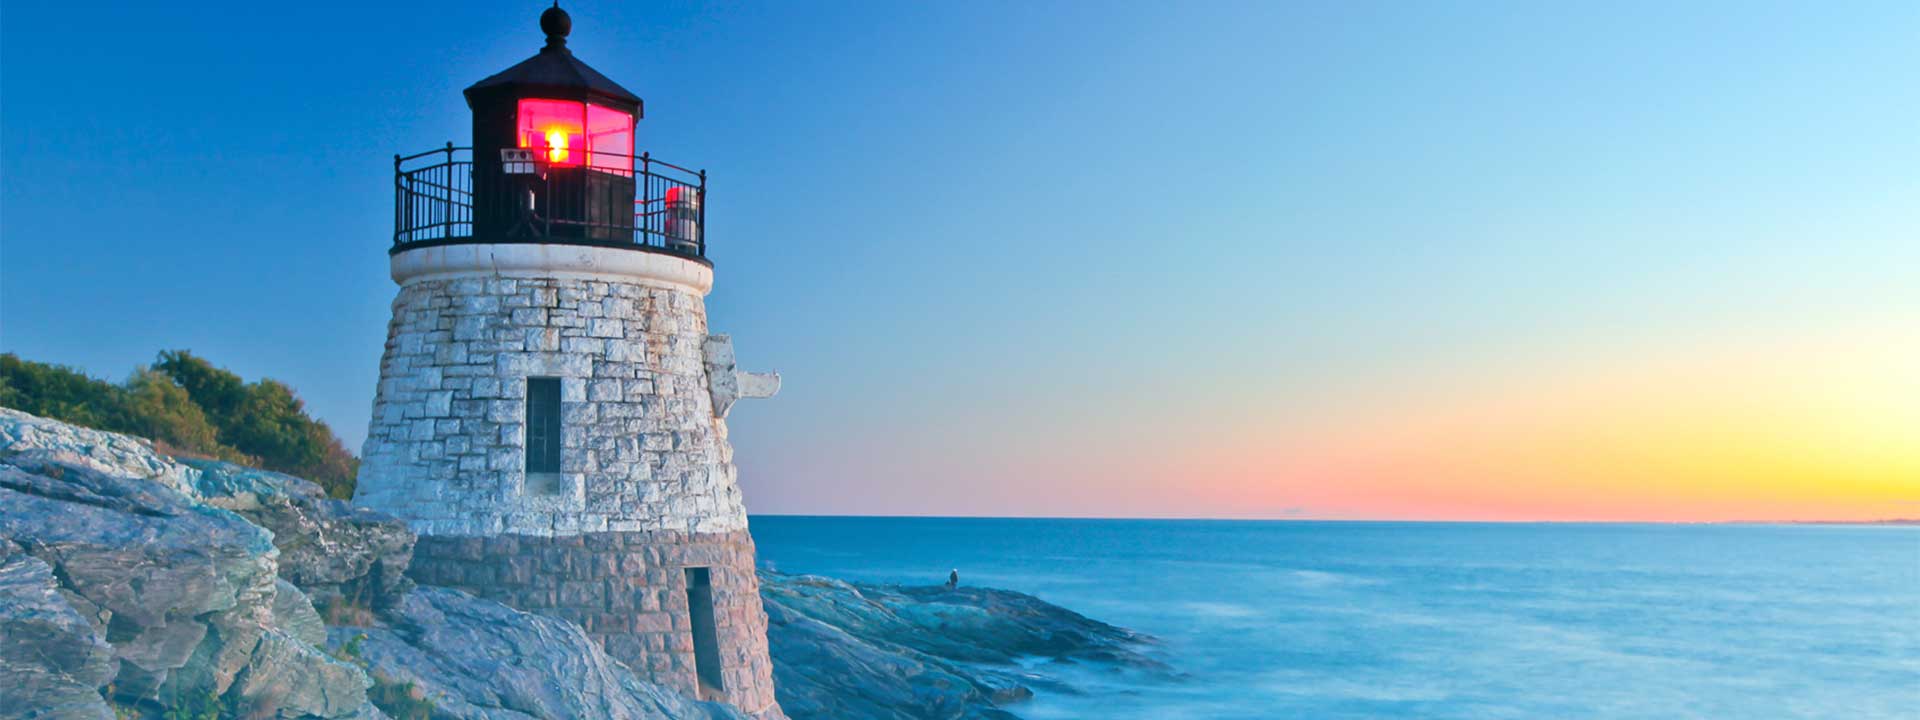 Rhode Island coastline with a lighthouse and view